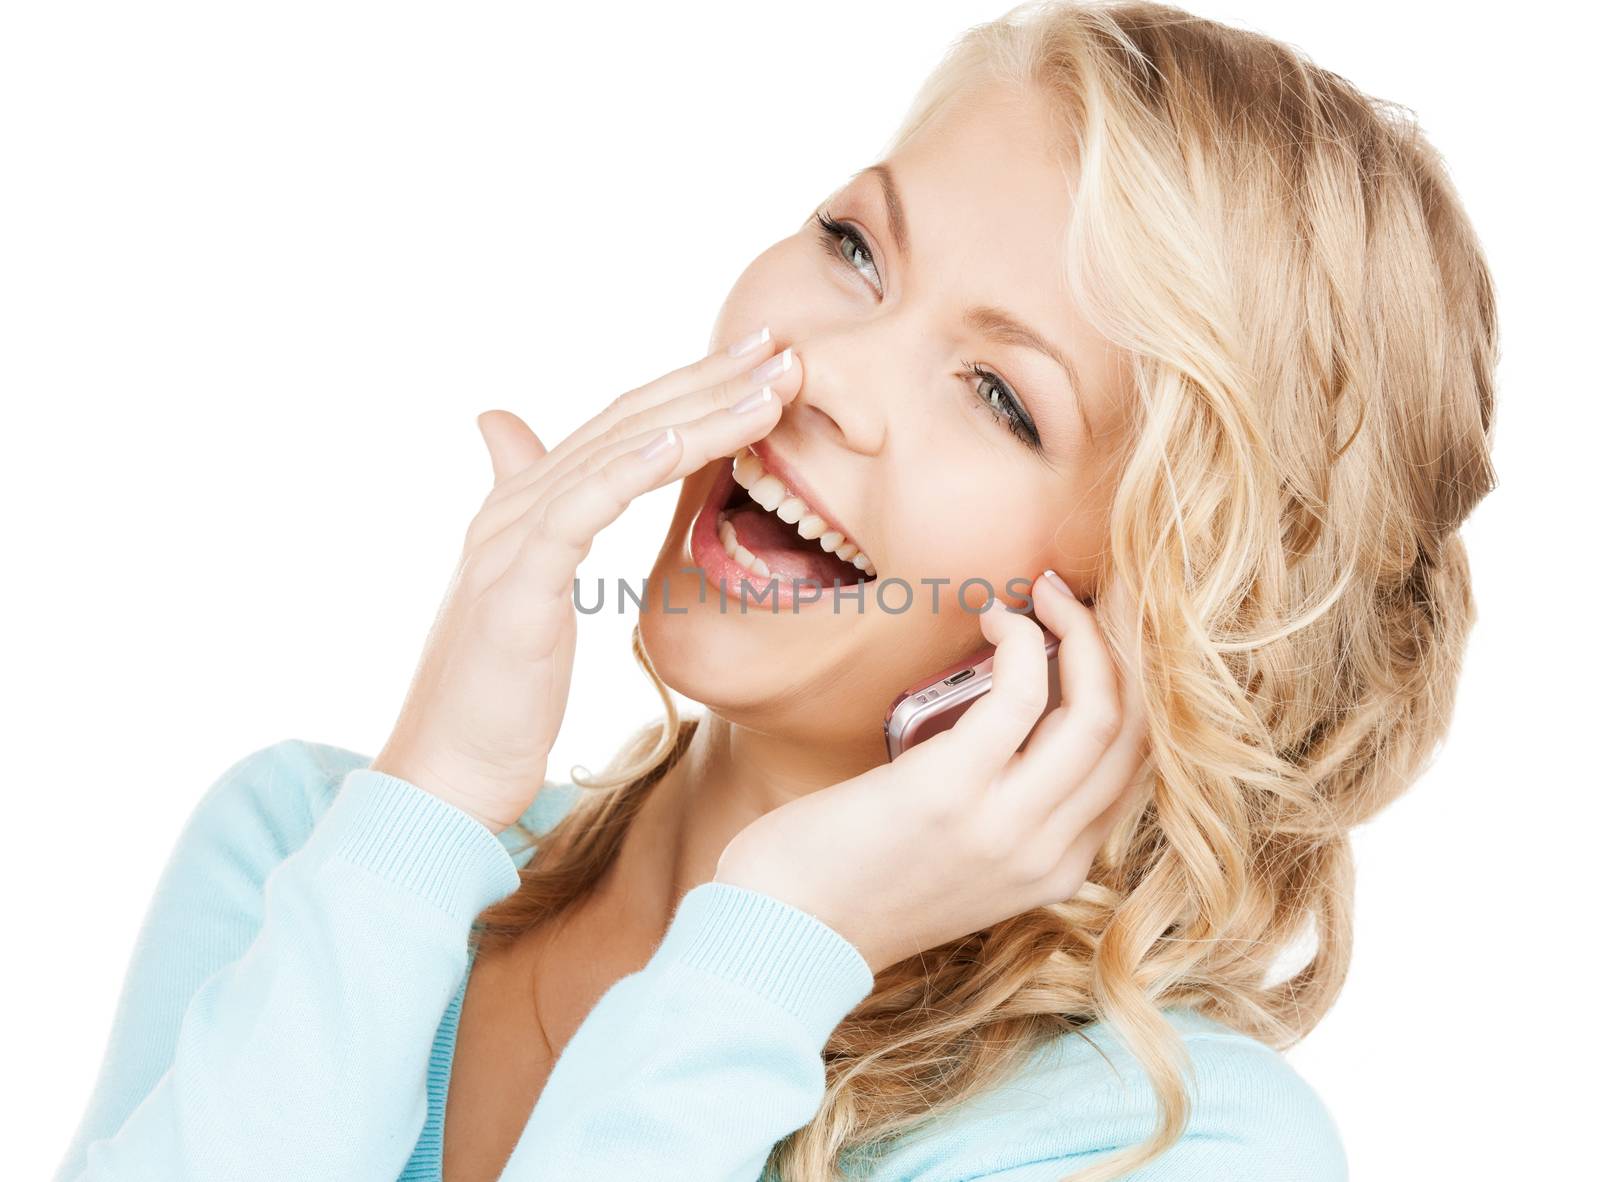 communication and technology concept - businesswoman with cell phone making a call